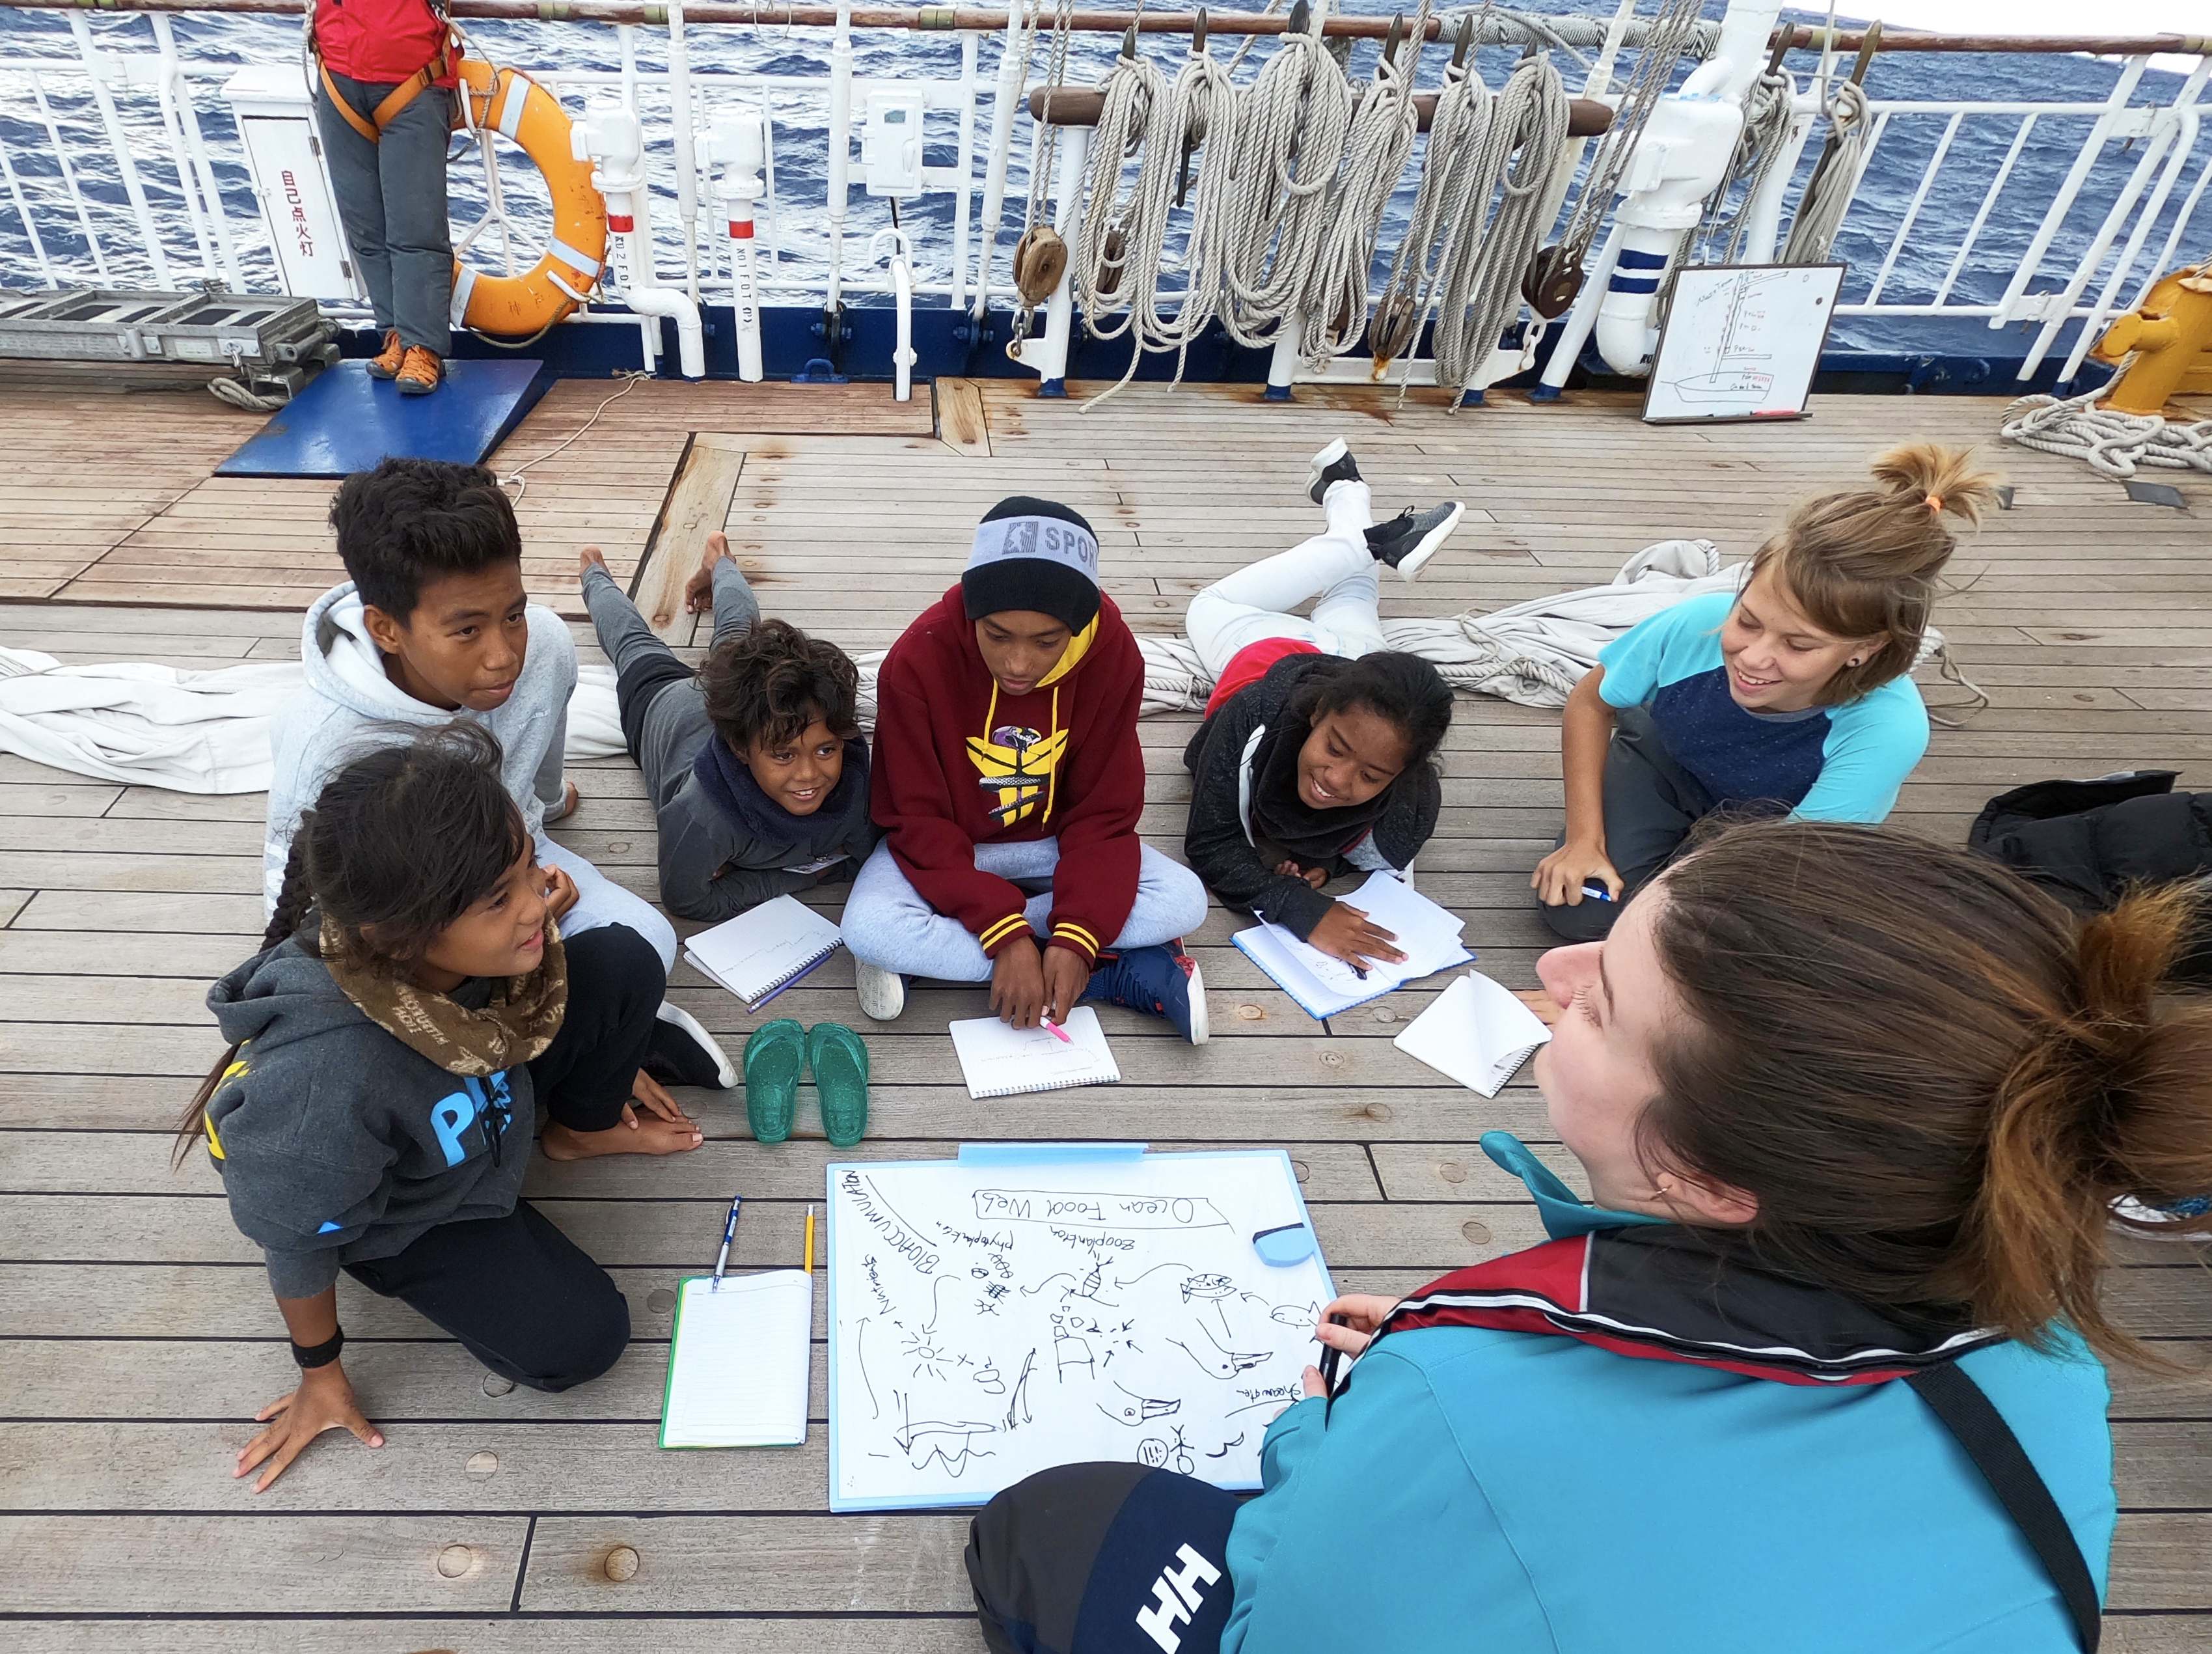 Holly, ocean literacy lead of the team, teaching marine conservation to Palau Youth on ship deck.